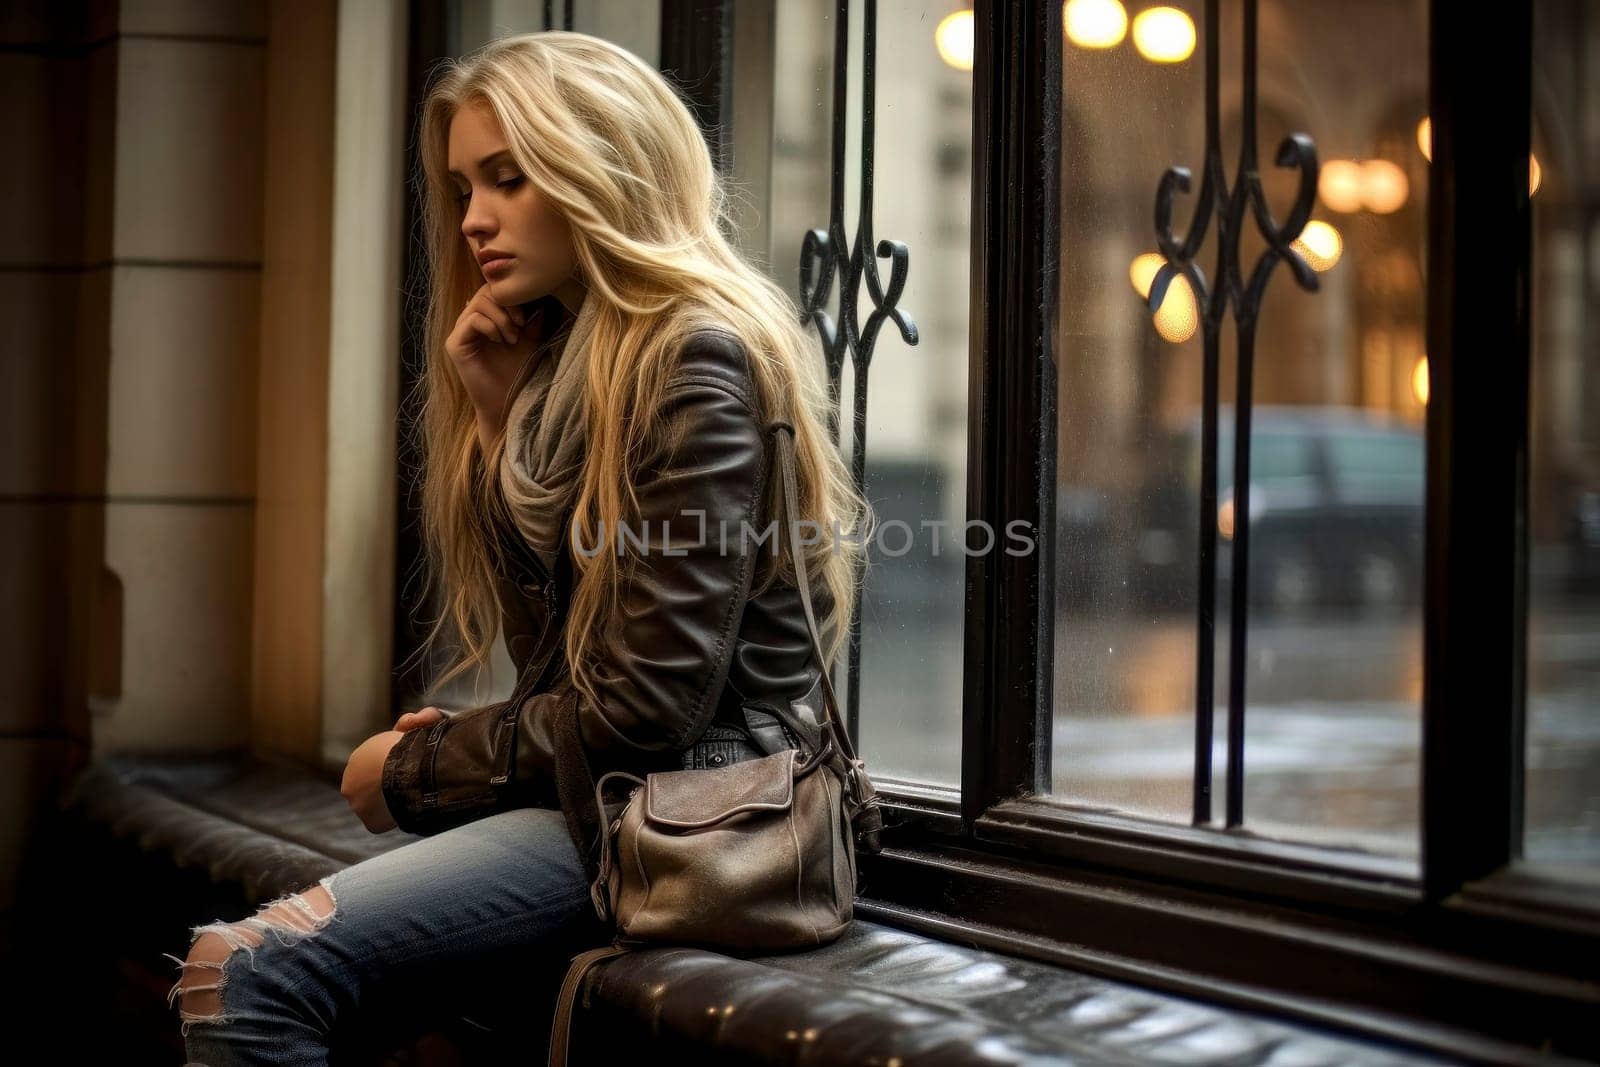 Blonde Girl Chatting on Phone by the Window by pippocarlot